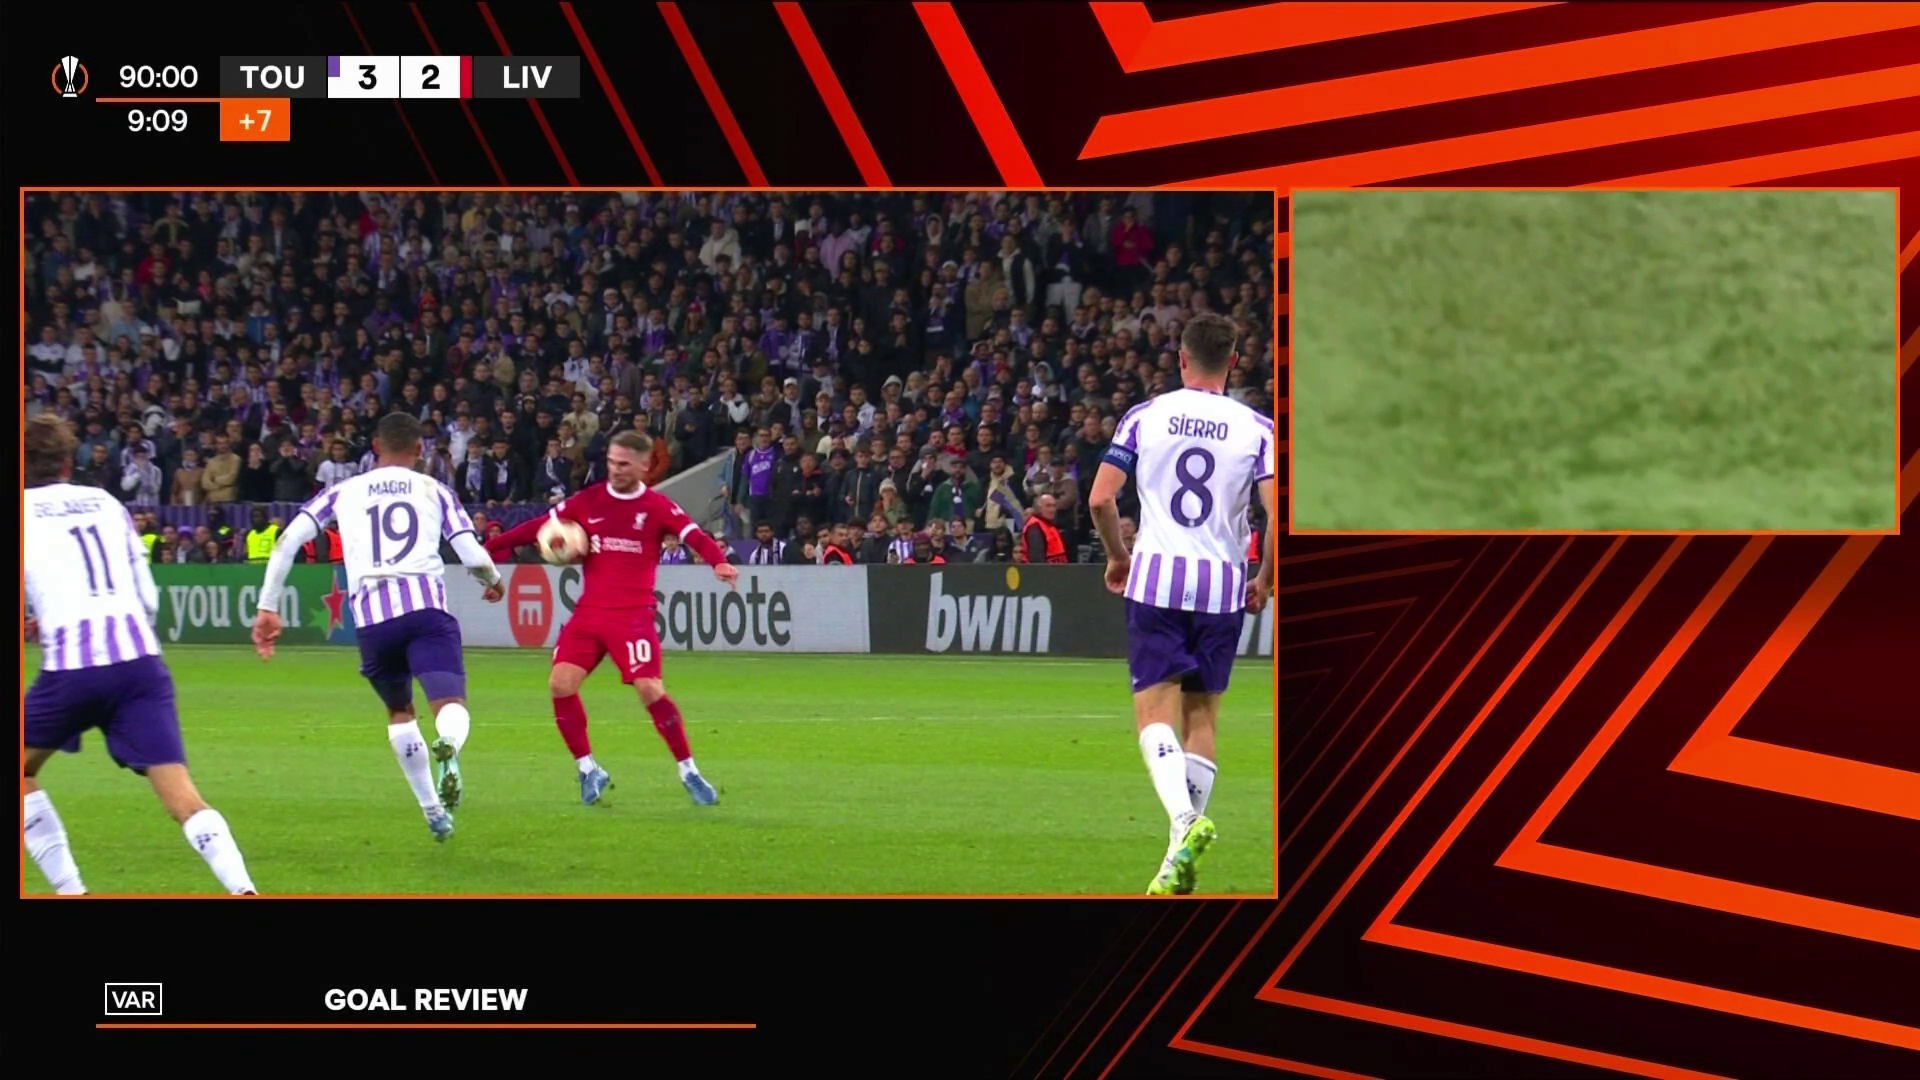 Liverpool disallowed goal against Toulouse 90+10'